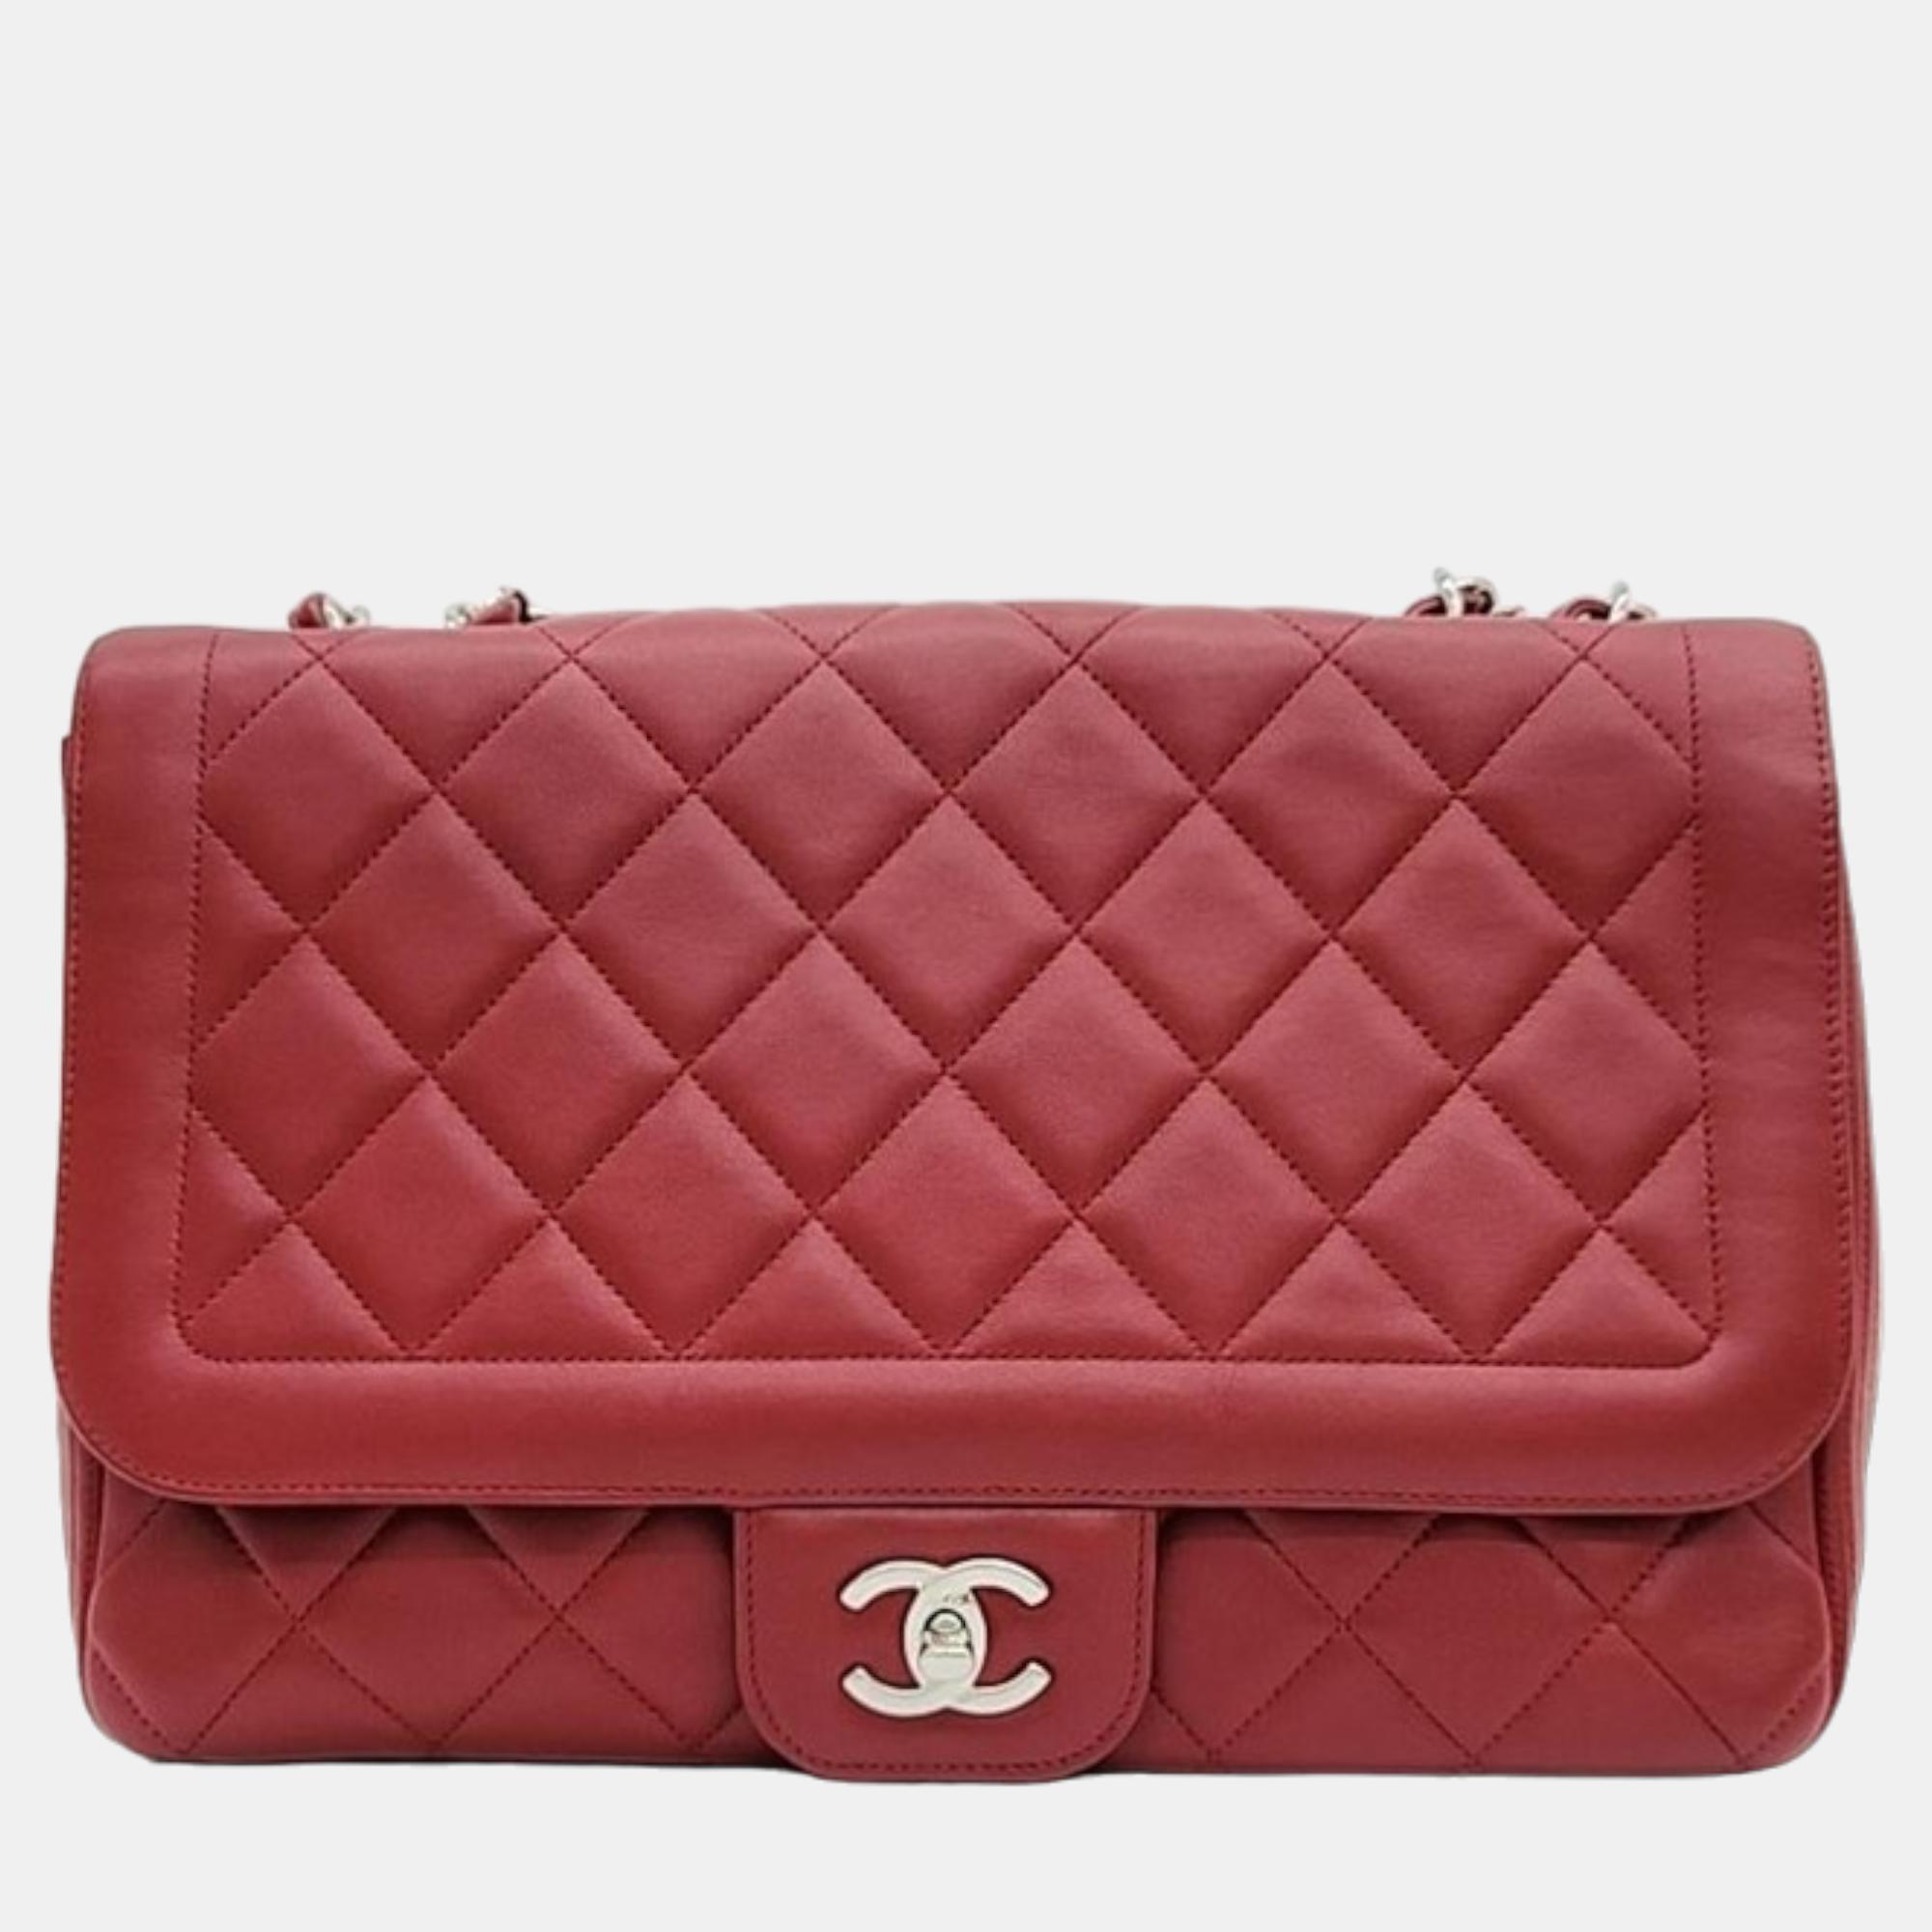 Chanel red leather coco rider flap bag